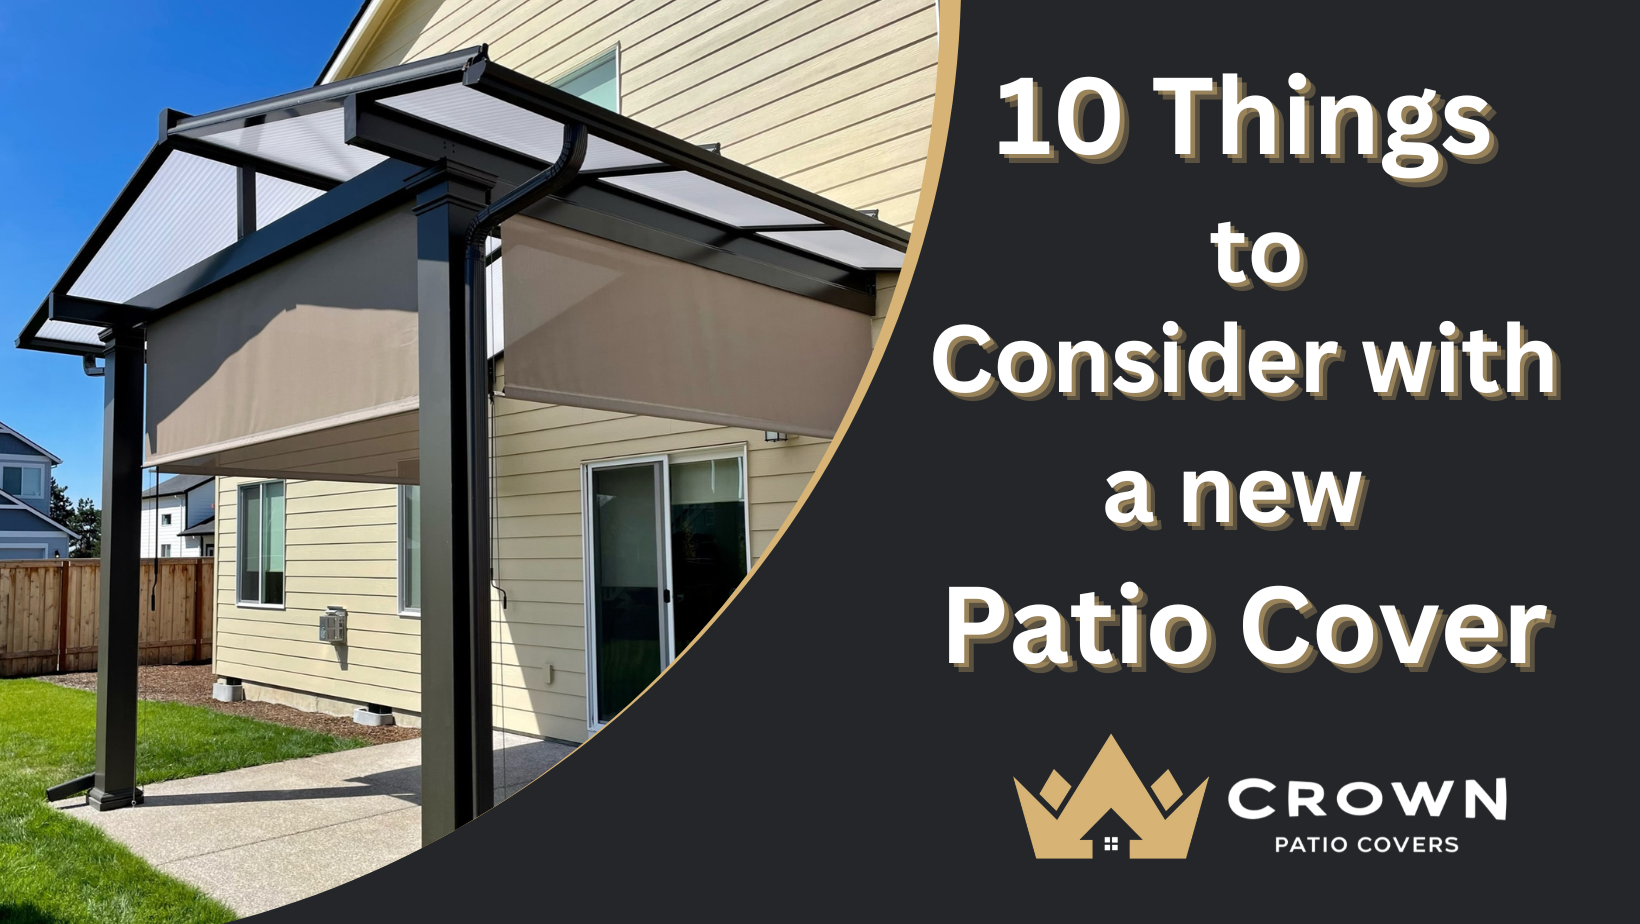 10 things to consider when budgeting for new patio cover